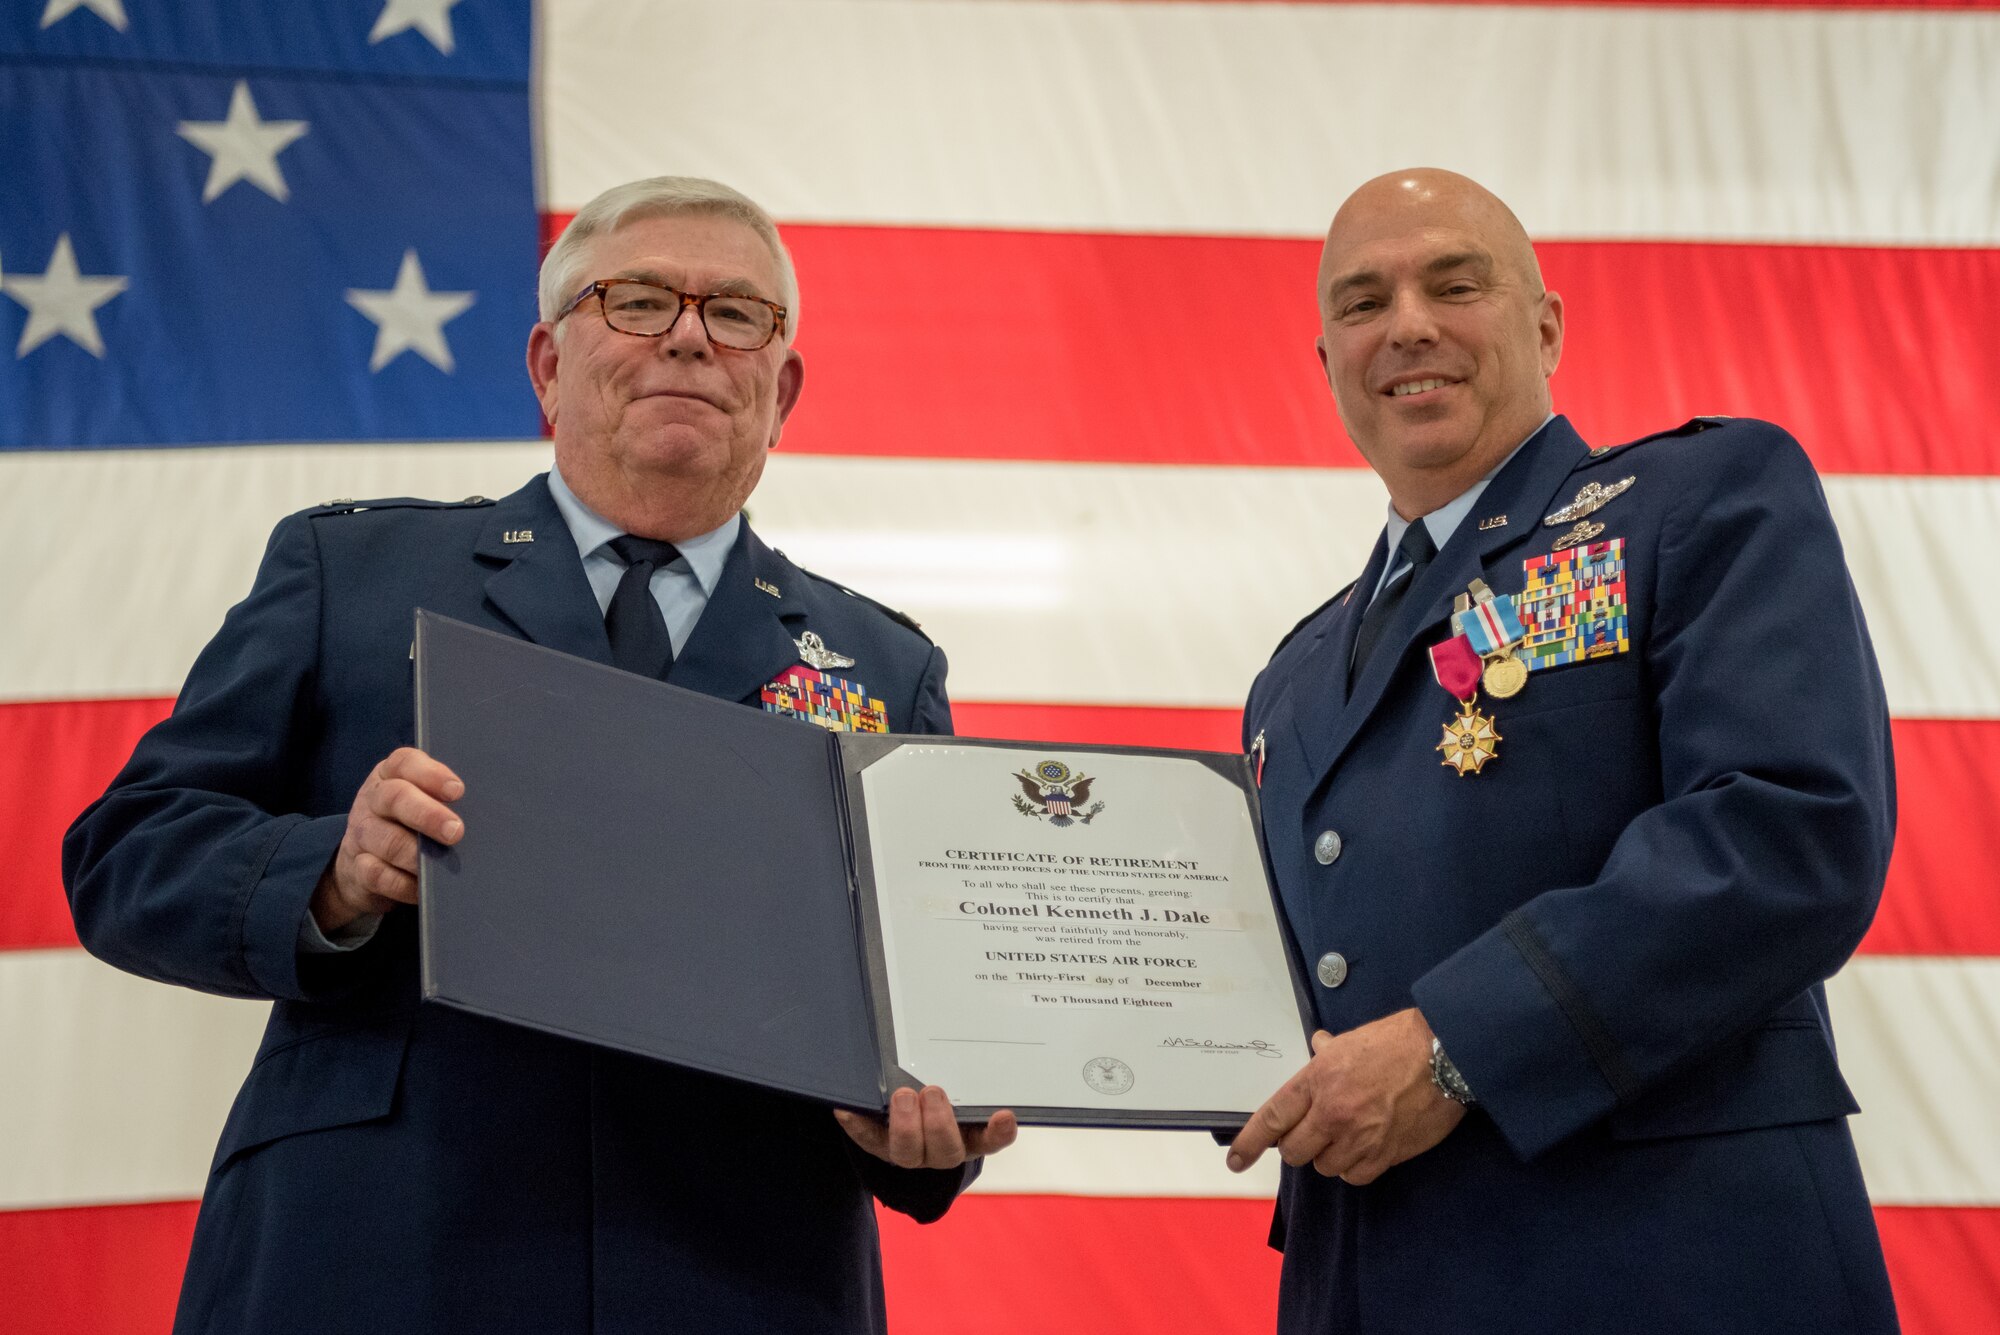 Col. Ken Dale (right), outgoing commander of the 123rd Maintenance Group, receives a certificate of retirement from retired Col. Michael Harden, former commander of the 123rd Airlift Wing, during Dale’s retirement ceremony at the Kentucky Air National Guard Base in Louisville, Ky., on Dec. 1, 2018. Dale is retiring after more than 38 years of service to the Kentucky Air National Guard. (U.S. Air National Guard photo by Staff Sgt. Joshua Horton)